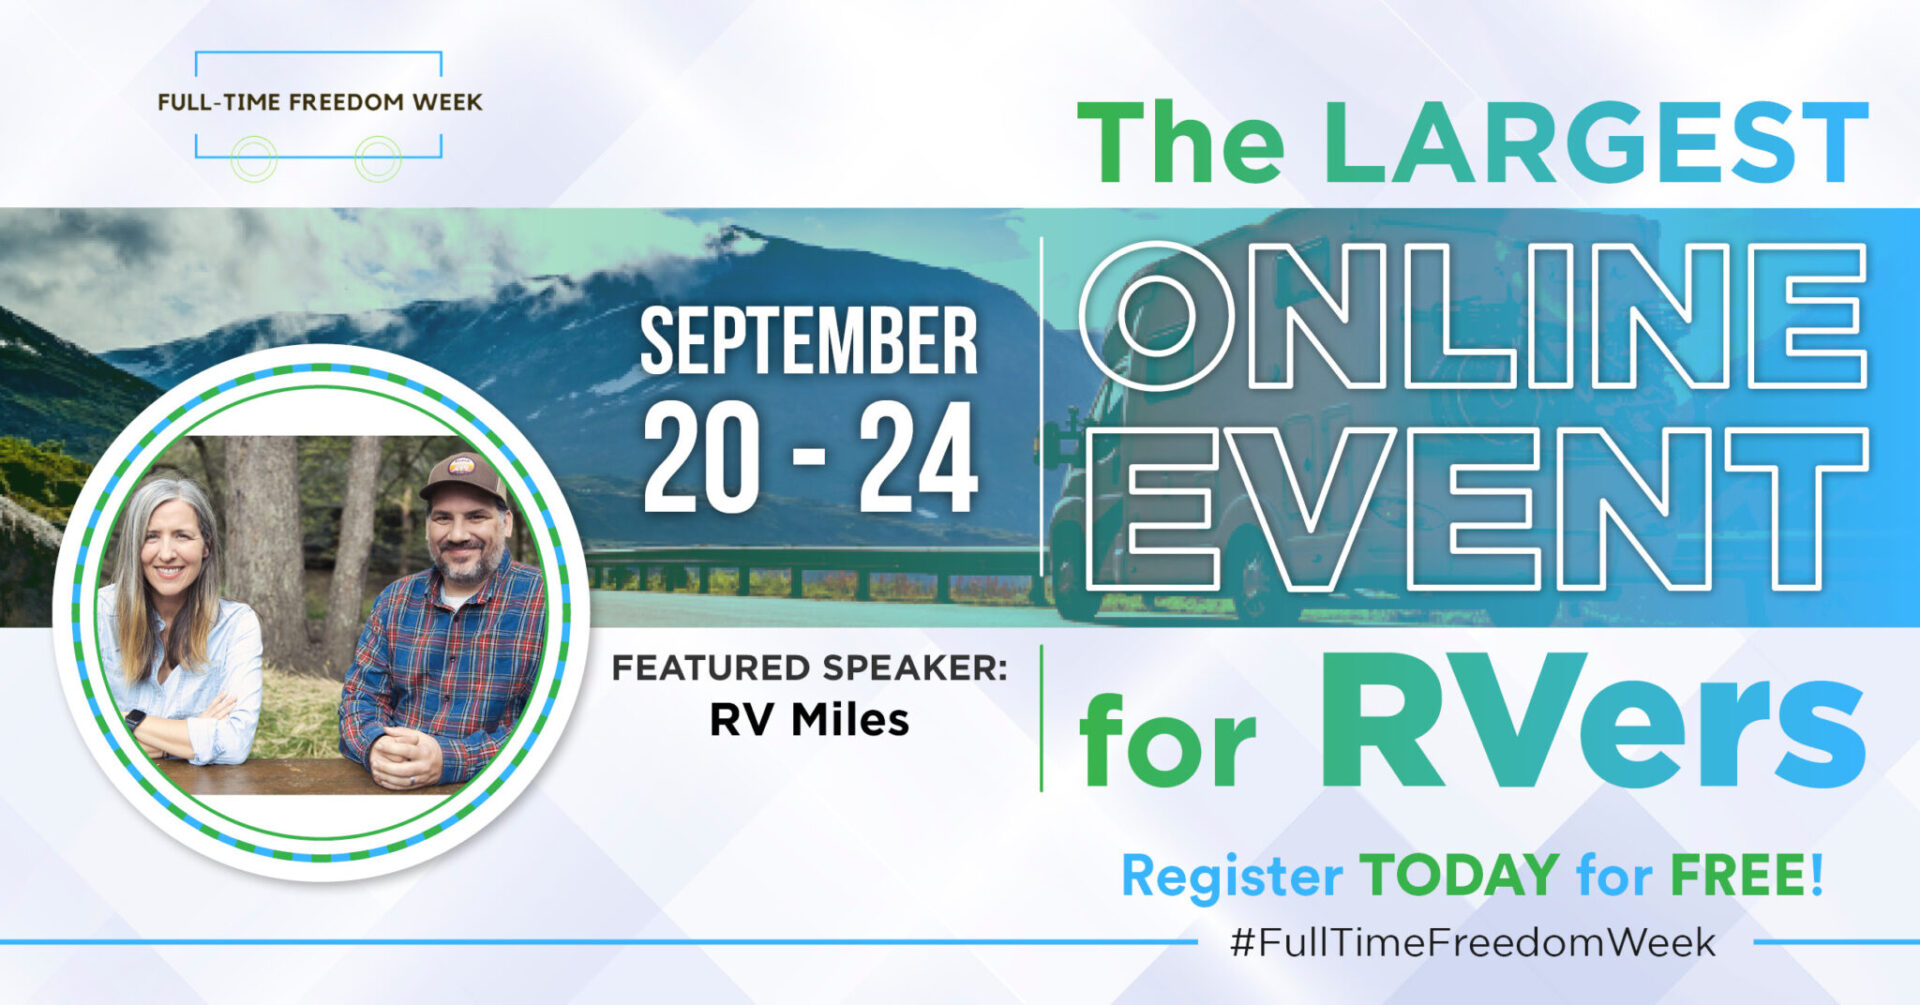 RV Miles Joins Full-Time Freedom Week Event